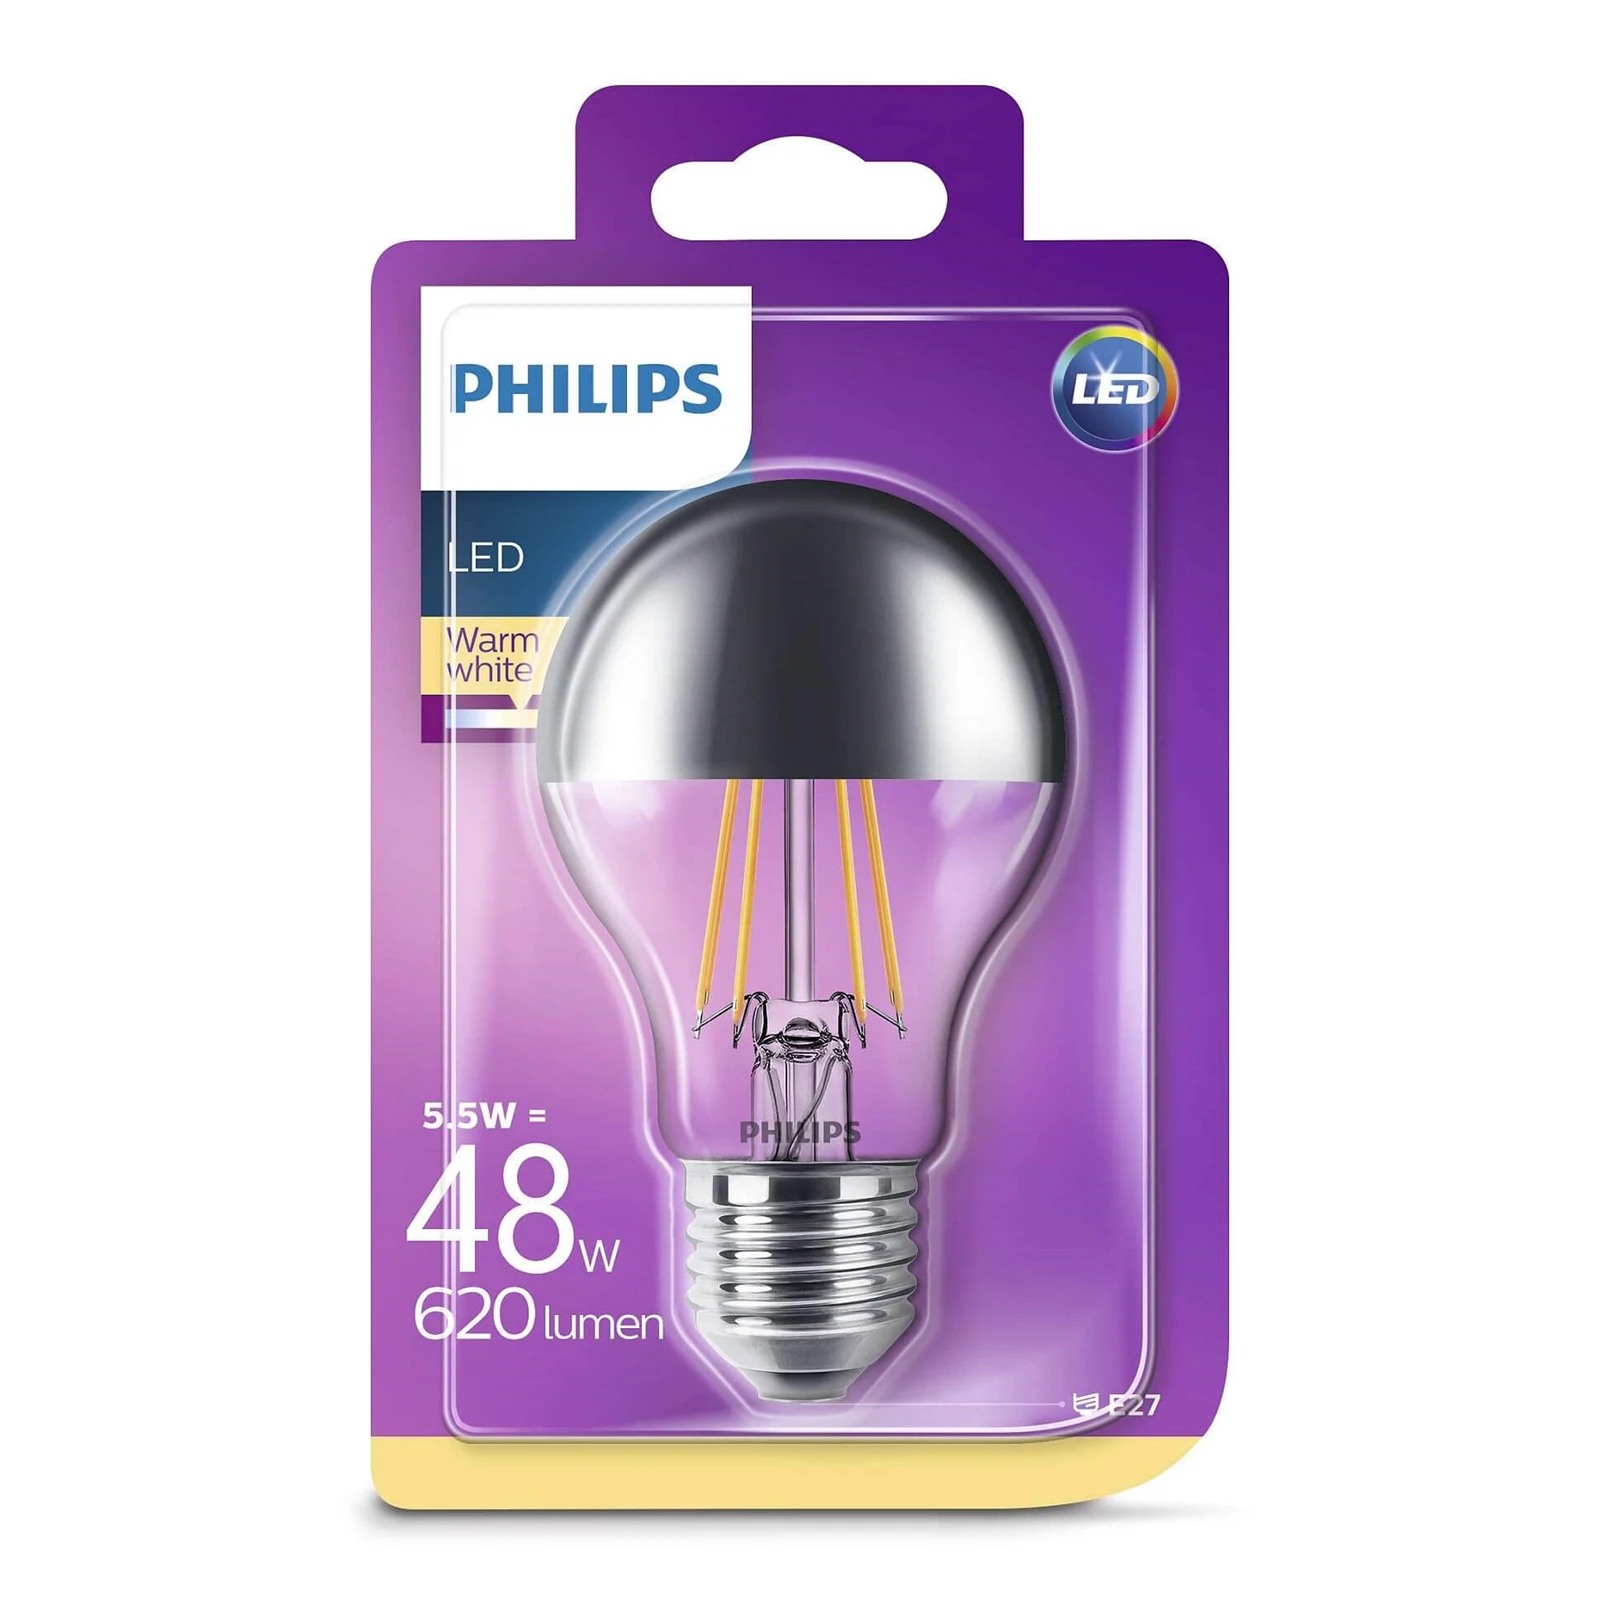 Caroline Billy ged Distraktion Bulb LED 7,2W Filament Top-Mirrored (650lm) E27 - Philips - Buy online